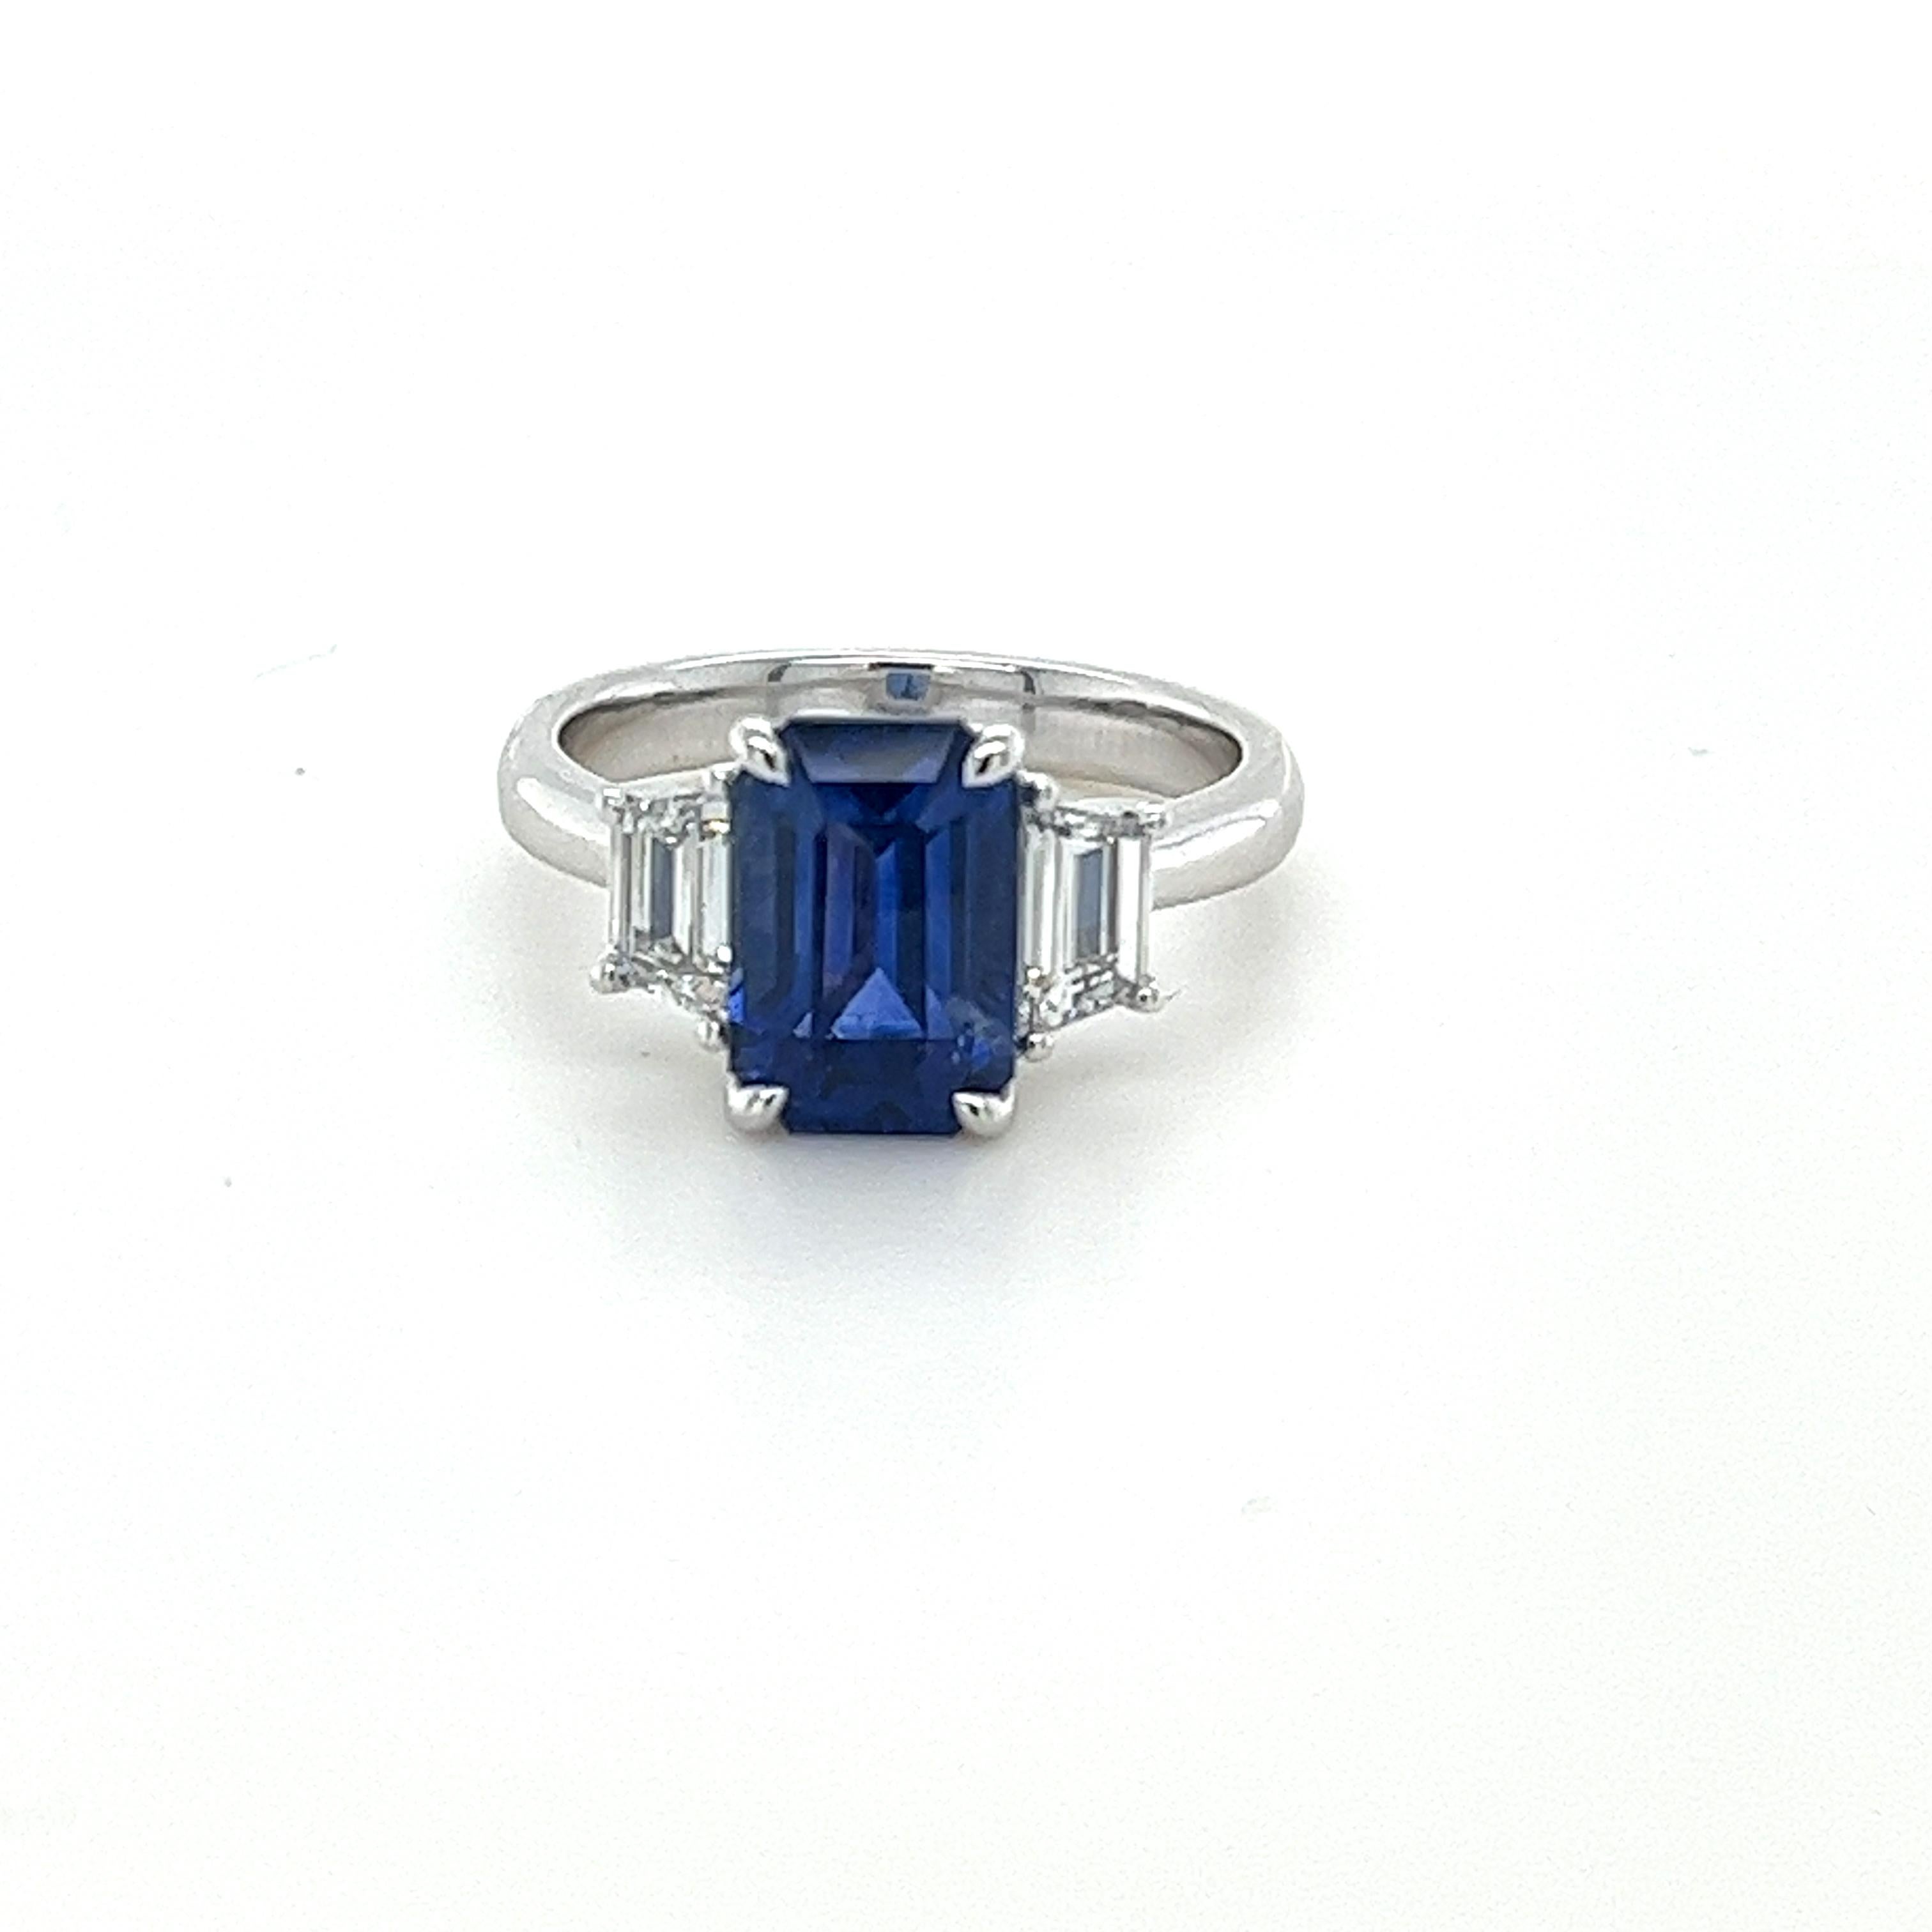 GIA Certified Emerald Cut Ceylon Sapphire & Diamond Ring in Platinum In New Condition For Sale In Great Neck, NY